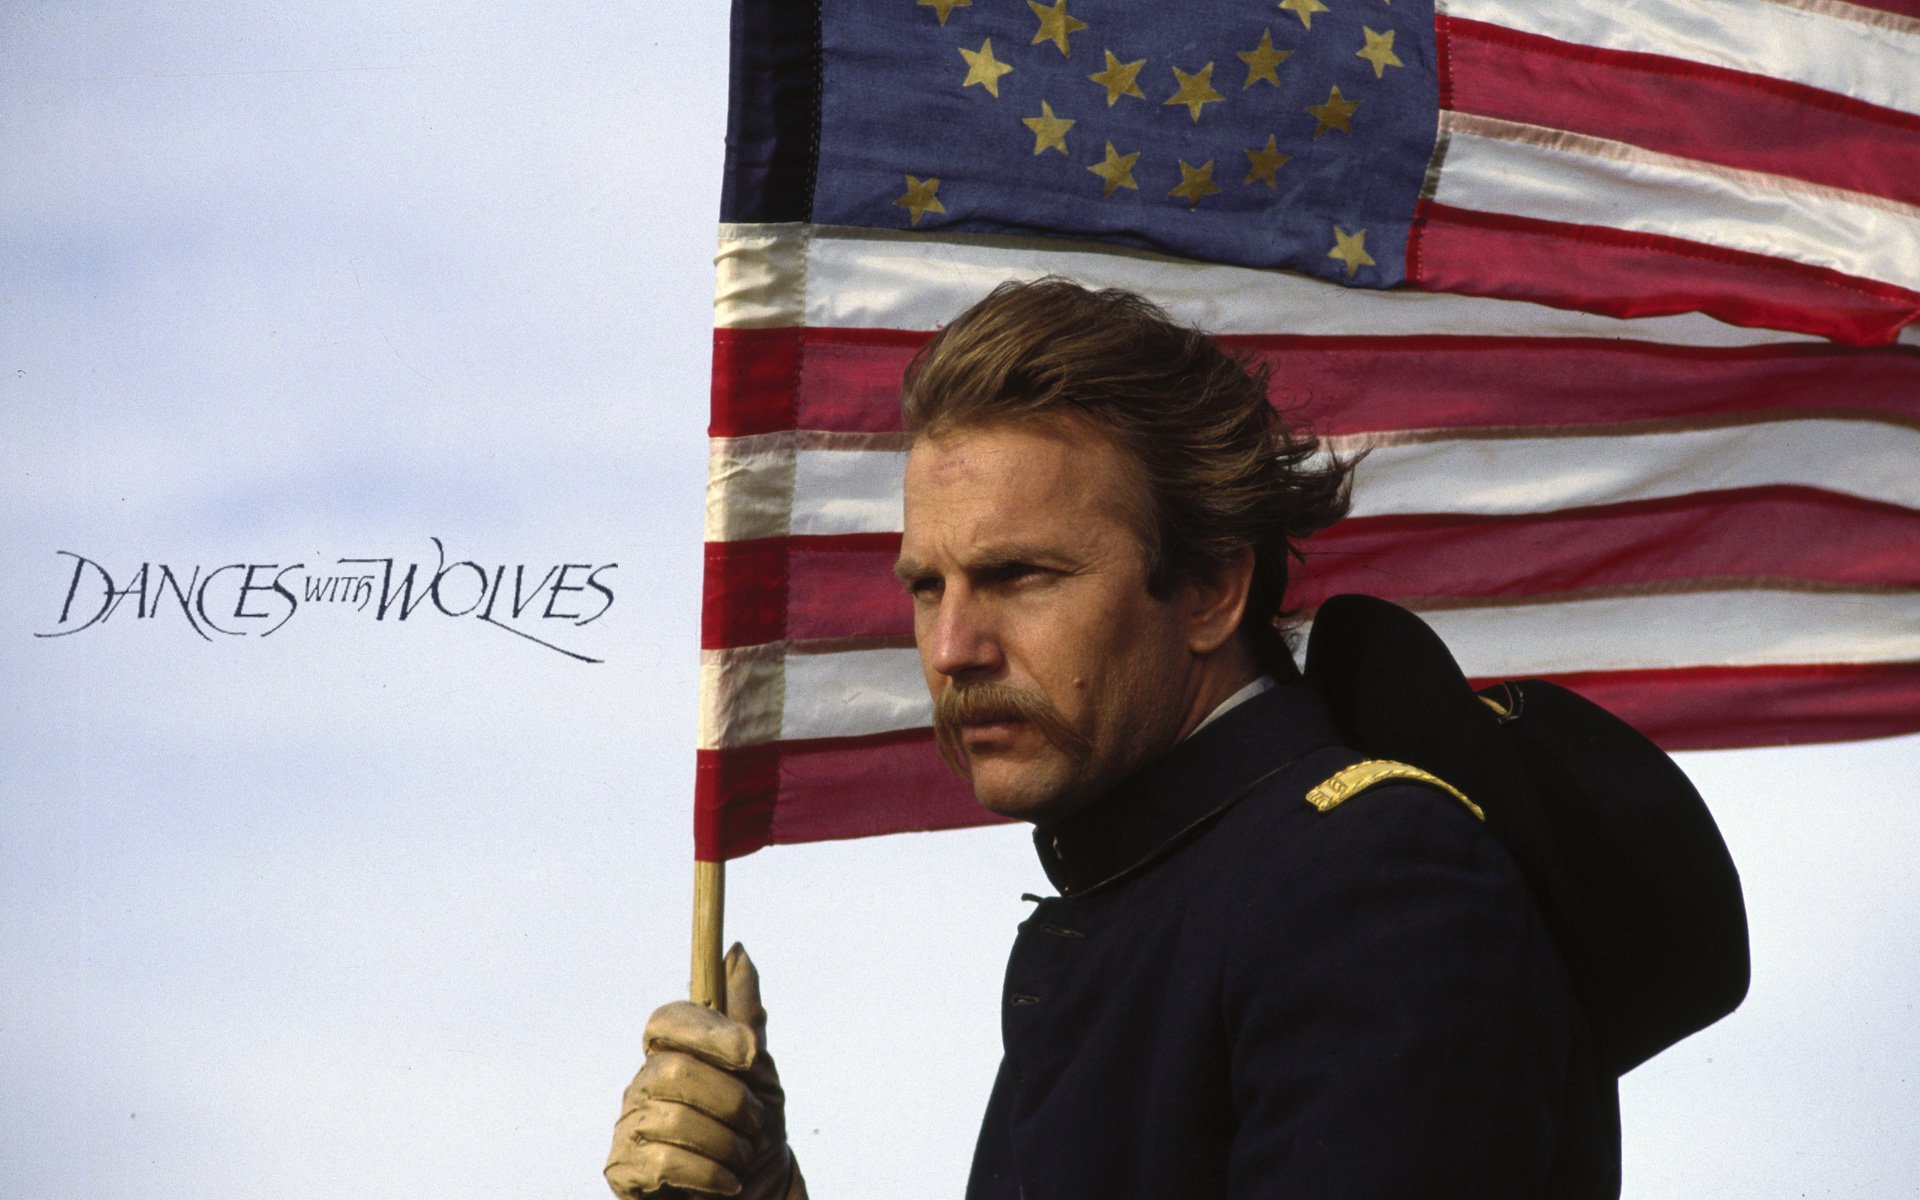 Dances with Wolves HD Wallpaper and Background Image